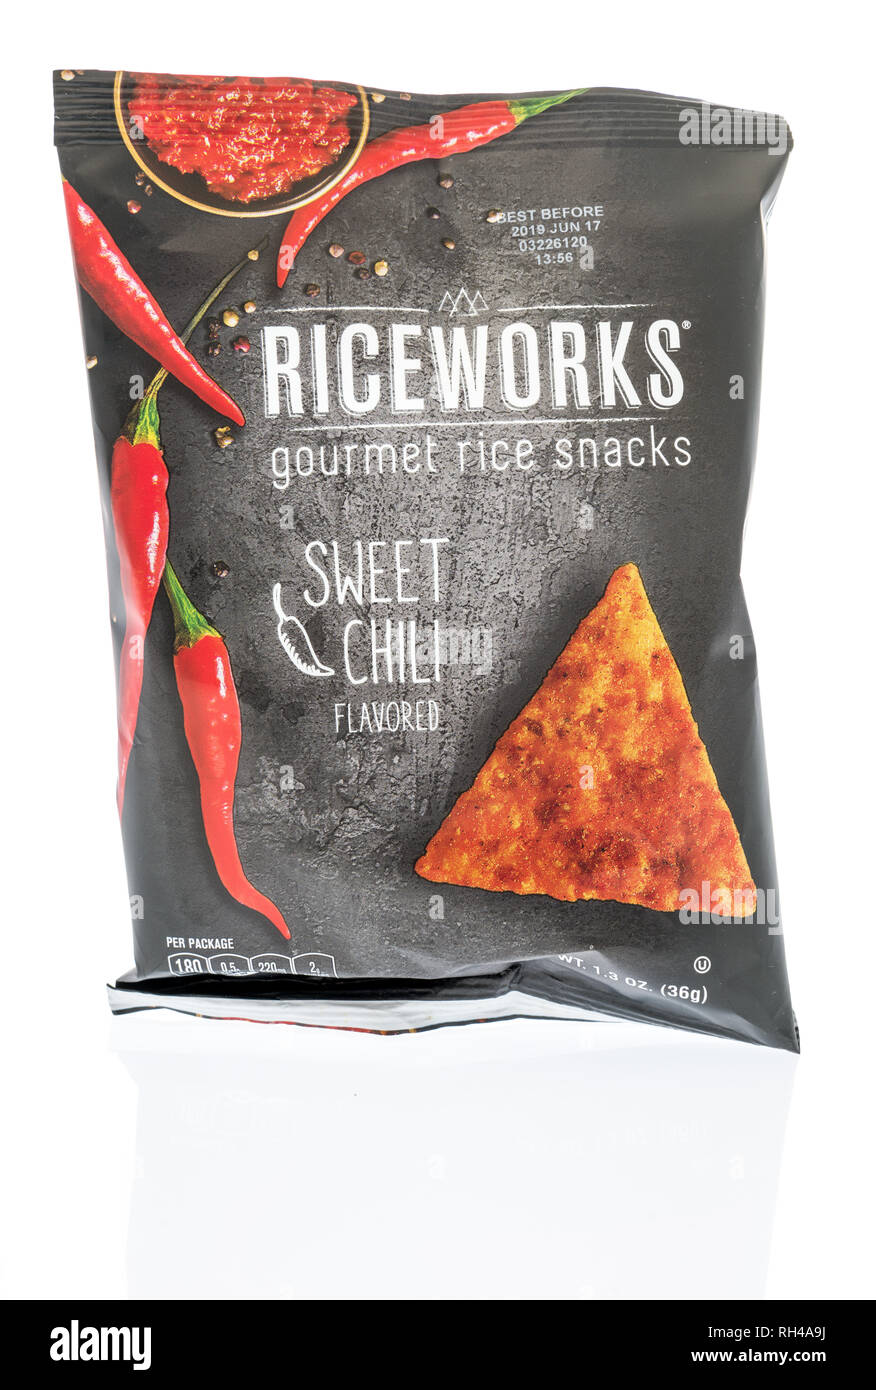 Winneconne, WI - 28 January 2019: A package of Rice Works gourmet rice snacks on an isolated background Stock Photo